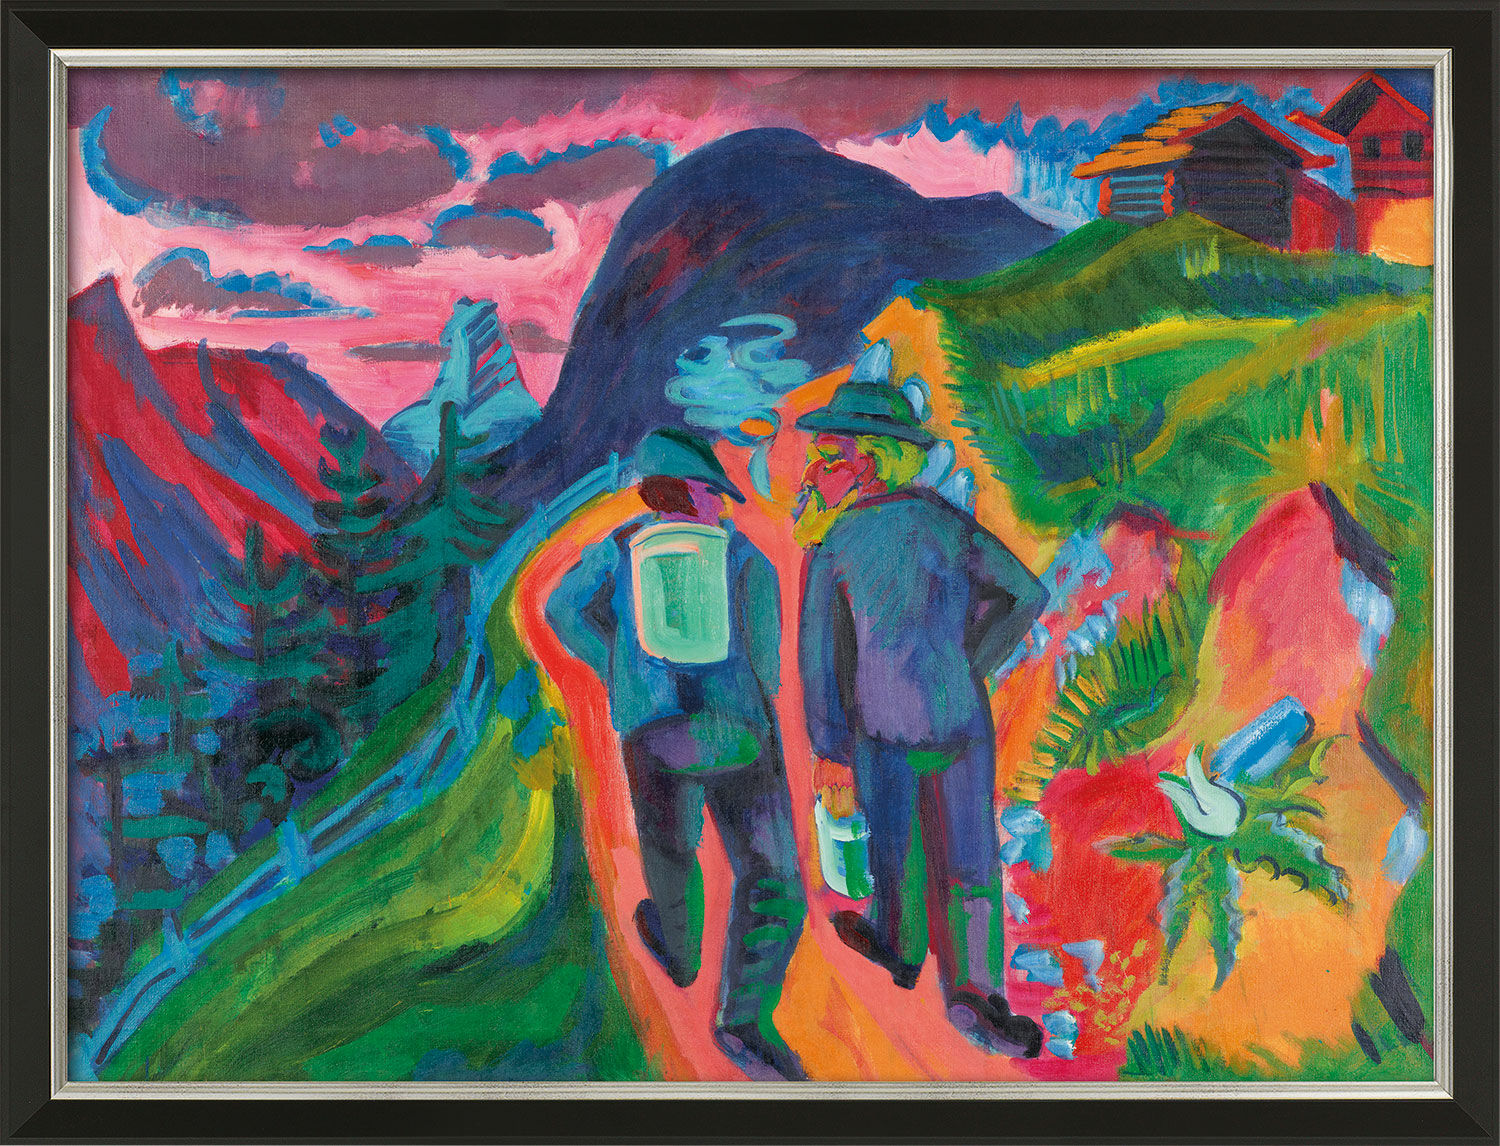 Picture "Alpine Path after Thunderstorm" (c. 1923/24), black and silver-coloured framed version by Ernst Ludwig Kirchner